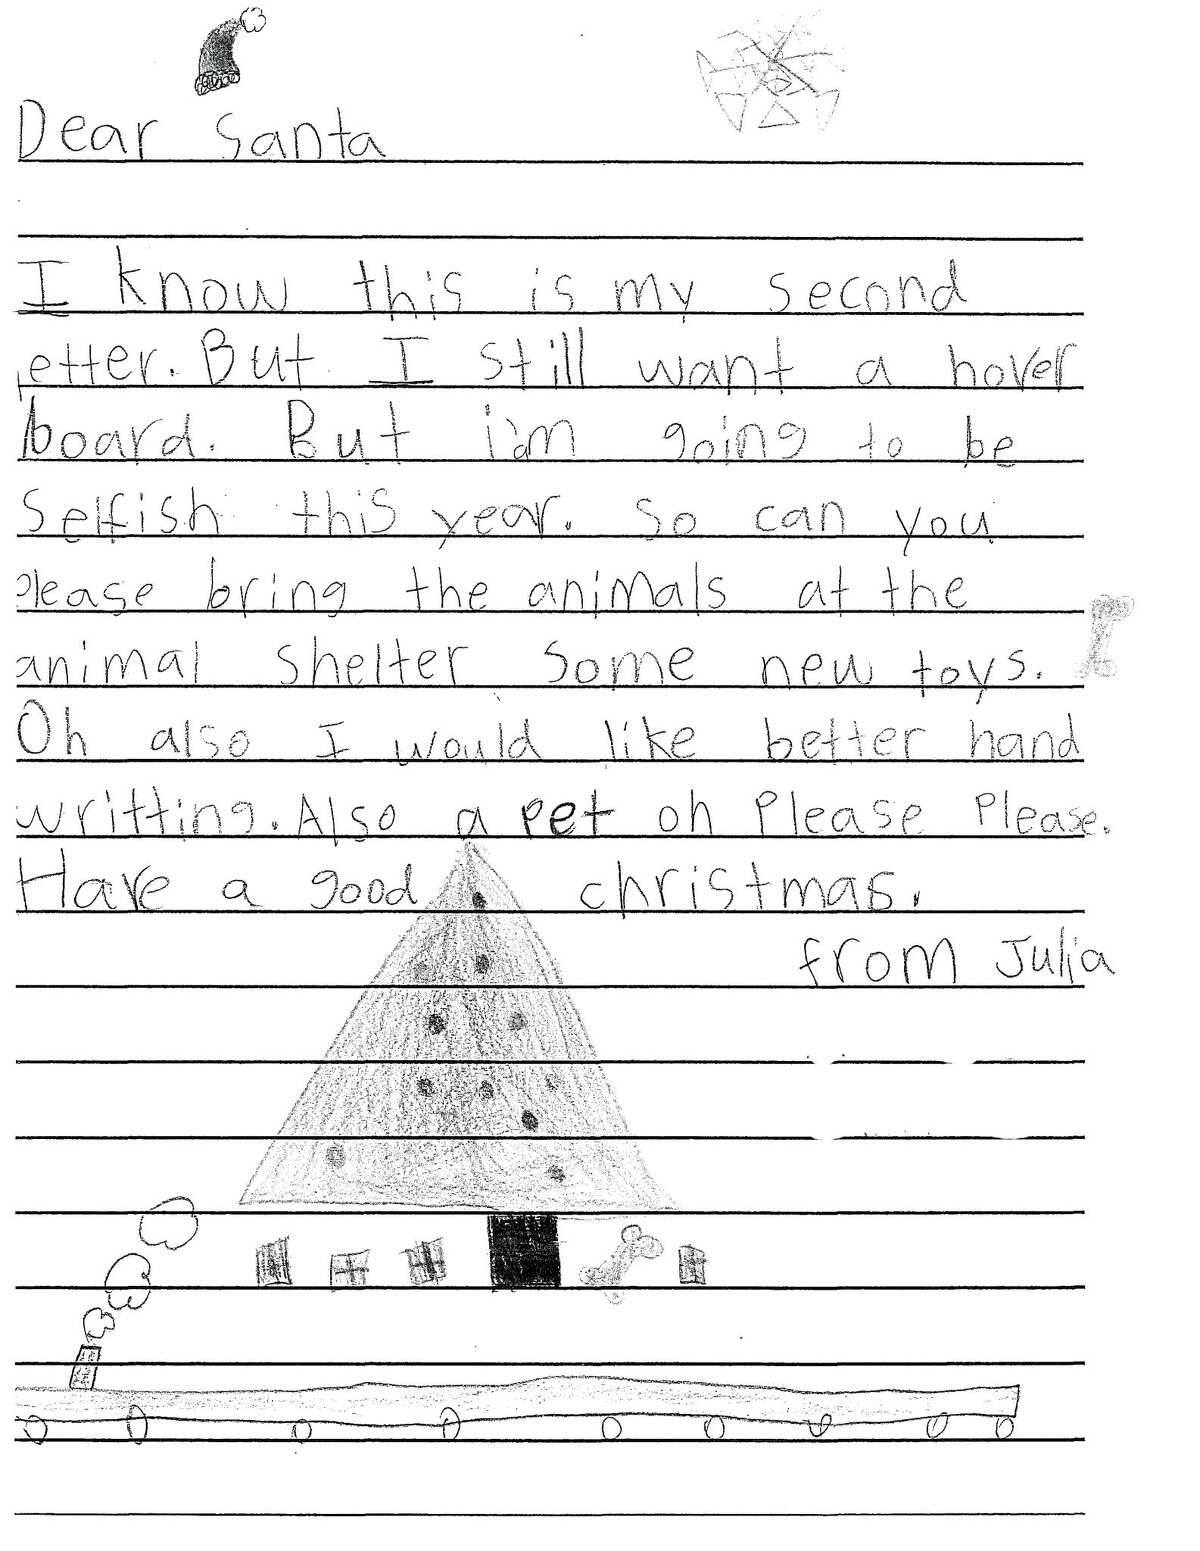 Letters to Santa from Poe Elementary students.